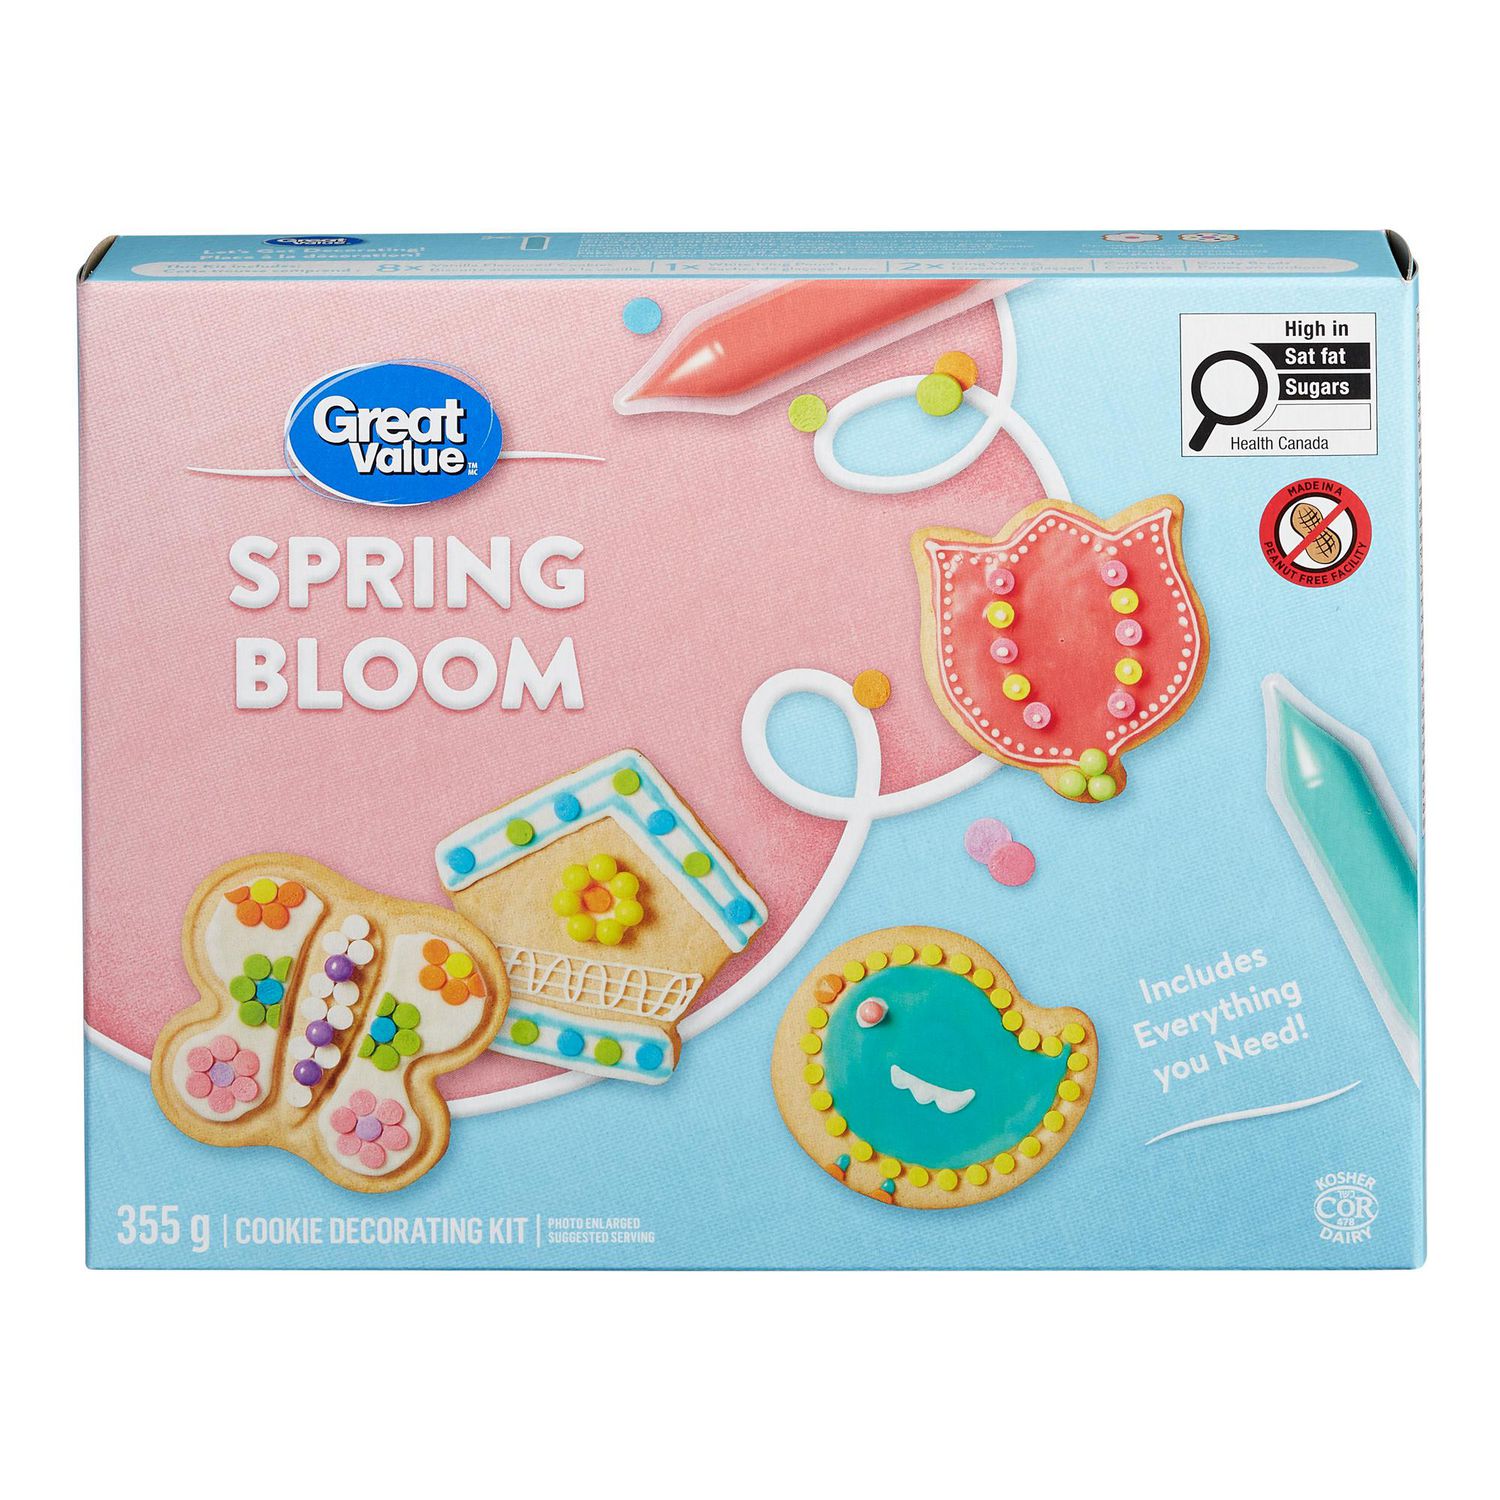 Great Value Spring Bloom Cookie Decorating Kit